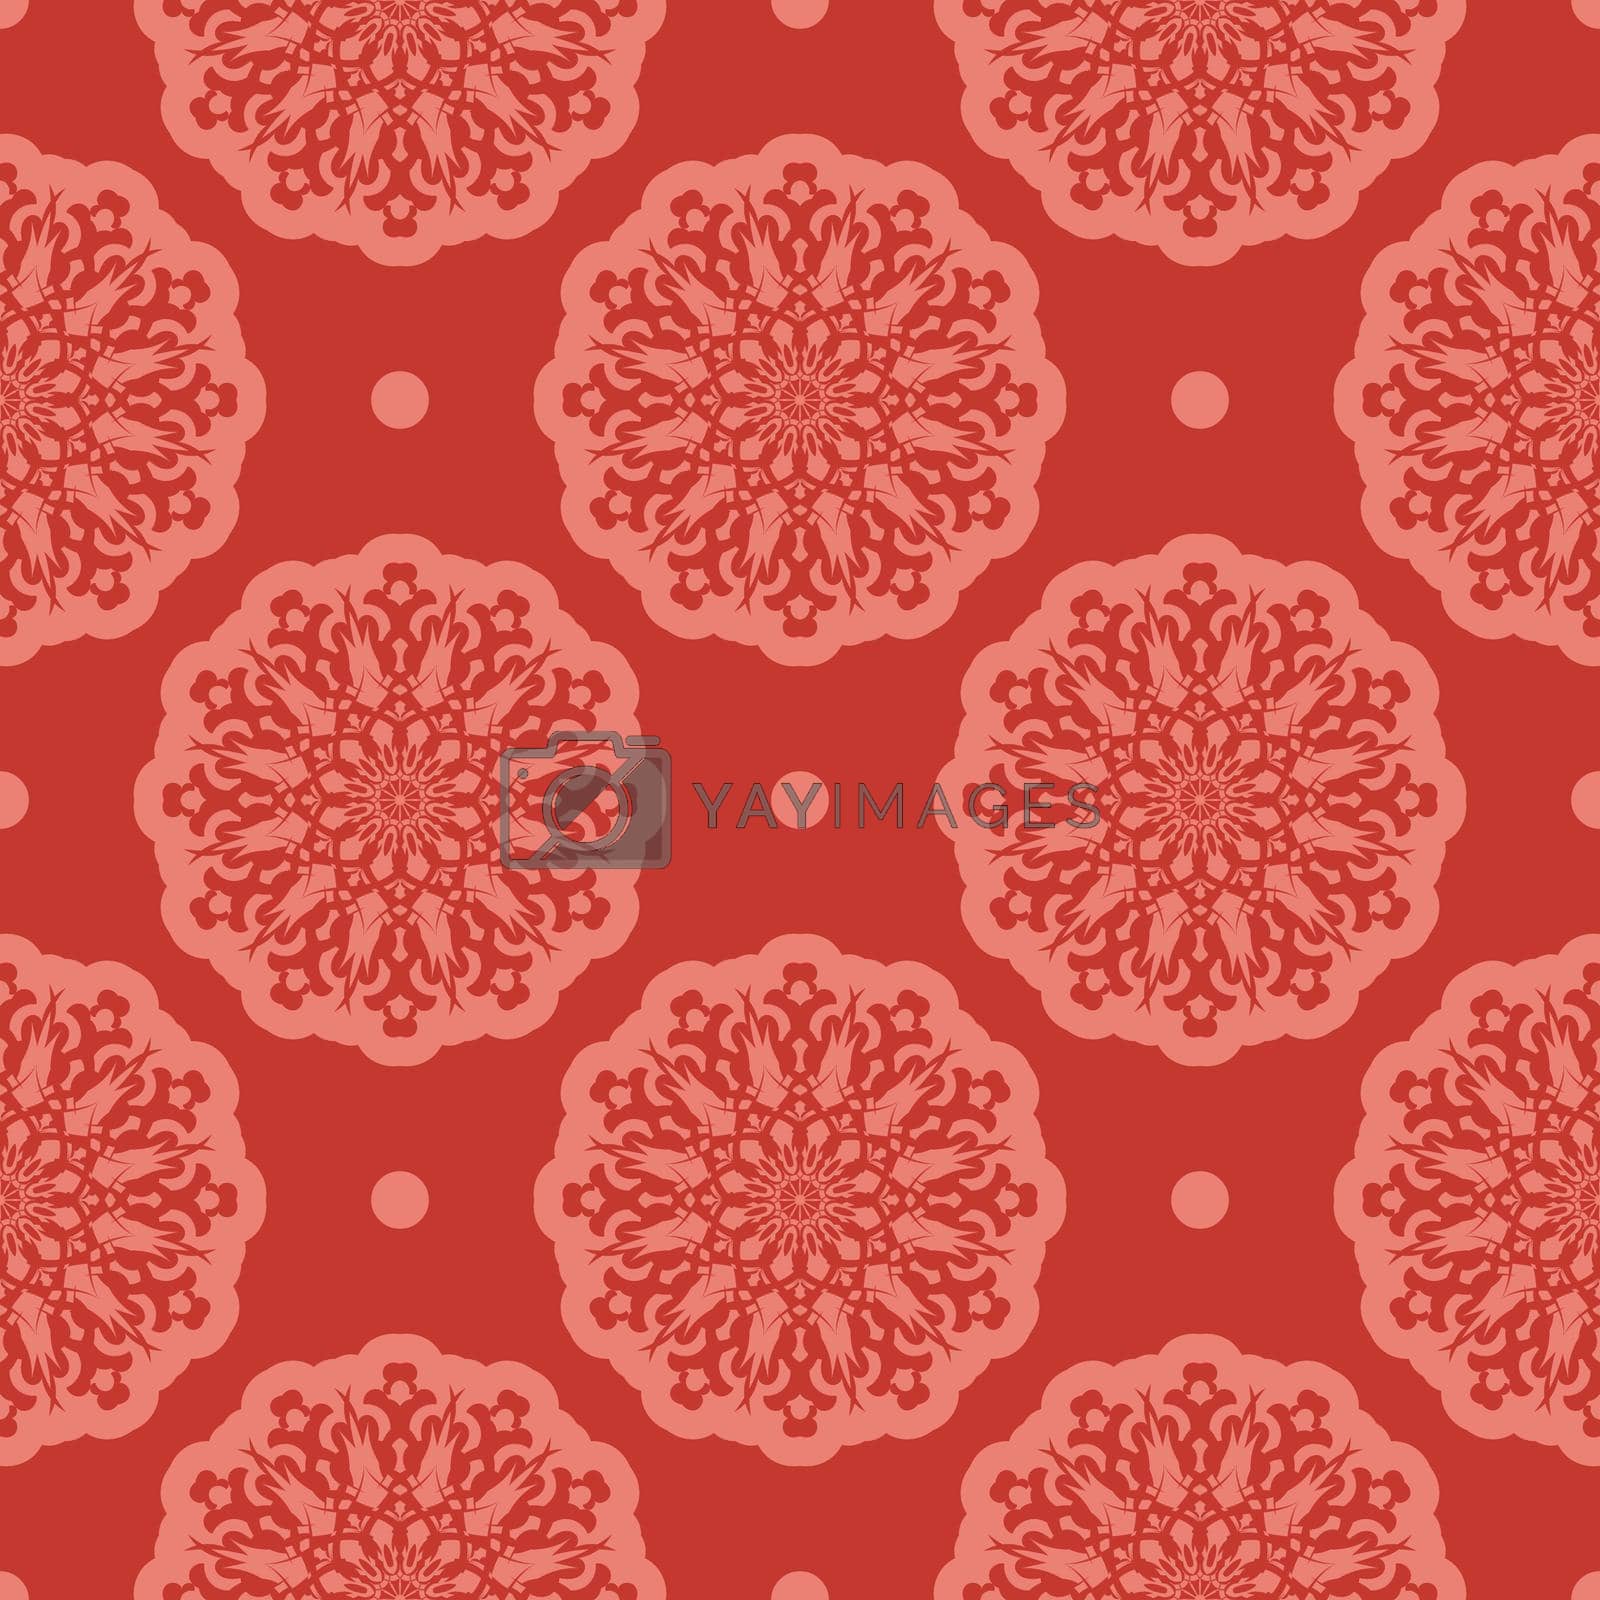 Red Christmas seamless pattern with ornament. Good for clothing, textiles, backgrounds and prints. Vector illustration.